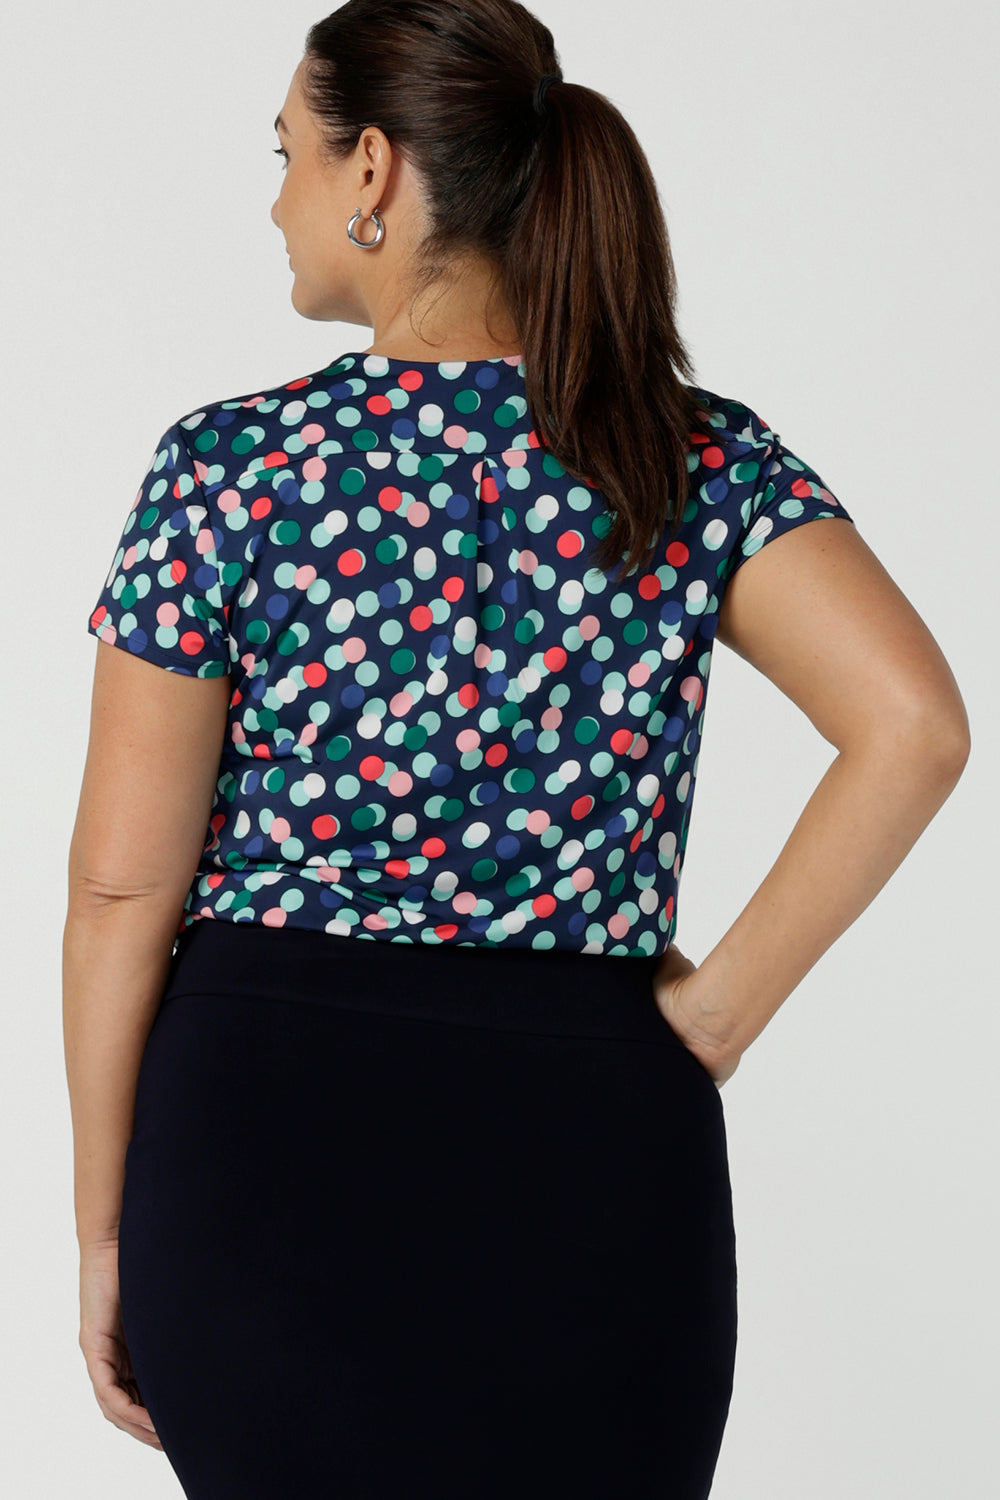 Back view of a happy corporate woman wearing the Emily Top in Blue bubbles spot print. Short sleeves with a pleat front. V-neckline and back yoke. Comfortable jersey fabric. Made in Australia for women size 8 - 24.